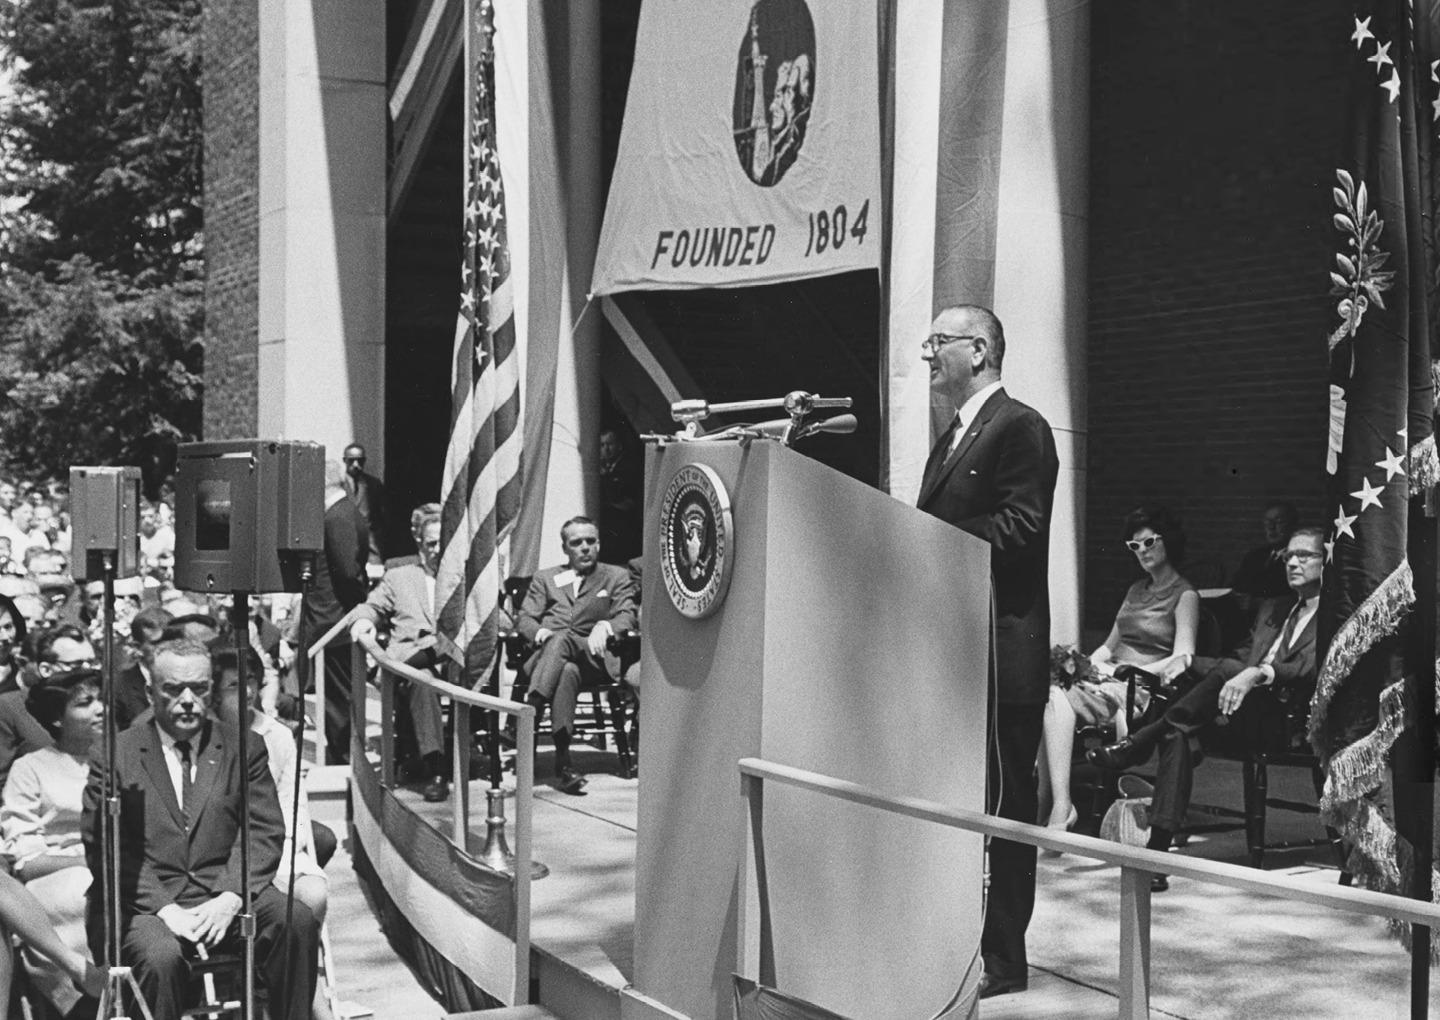 President Lyndon B. Johnson addresses a crowd estimated at 15,000 from the West Portico of Memorial Auditorium on May 7, 1964, as part of a five-state tour in support of his War on Poverty program. Bronze plaques on the West Portico commemorate the many distinguished guests and history makers who have visited campus – from Martin Luther King Jr. and Eleanor Roosevelt to several U.S. presidents. Photo courtesy of the Mahn Center for Archives and Special Collections